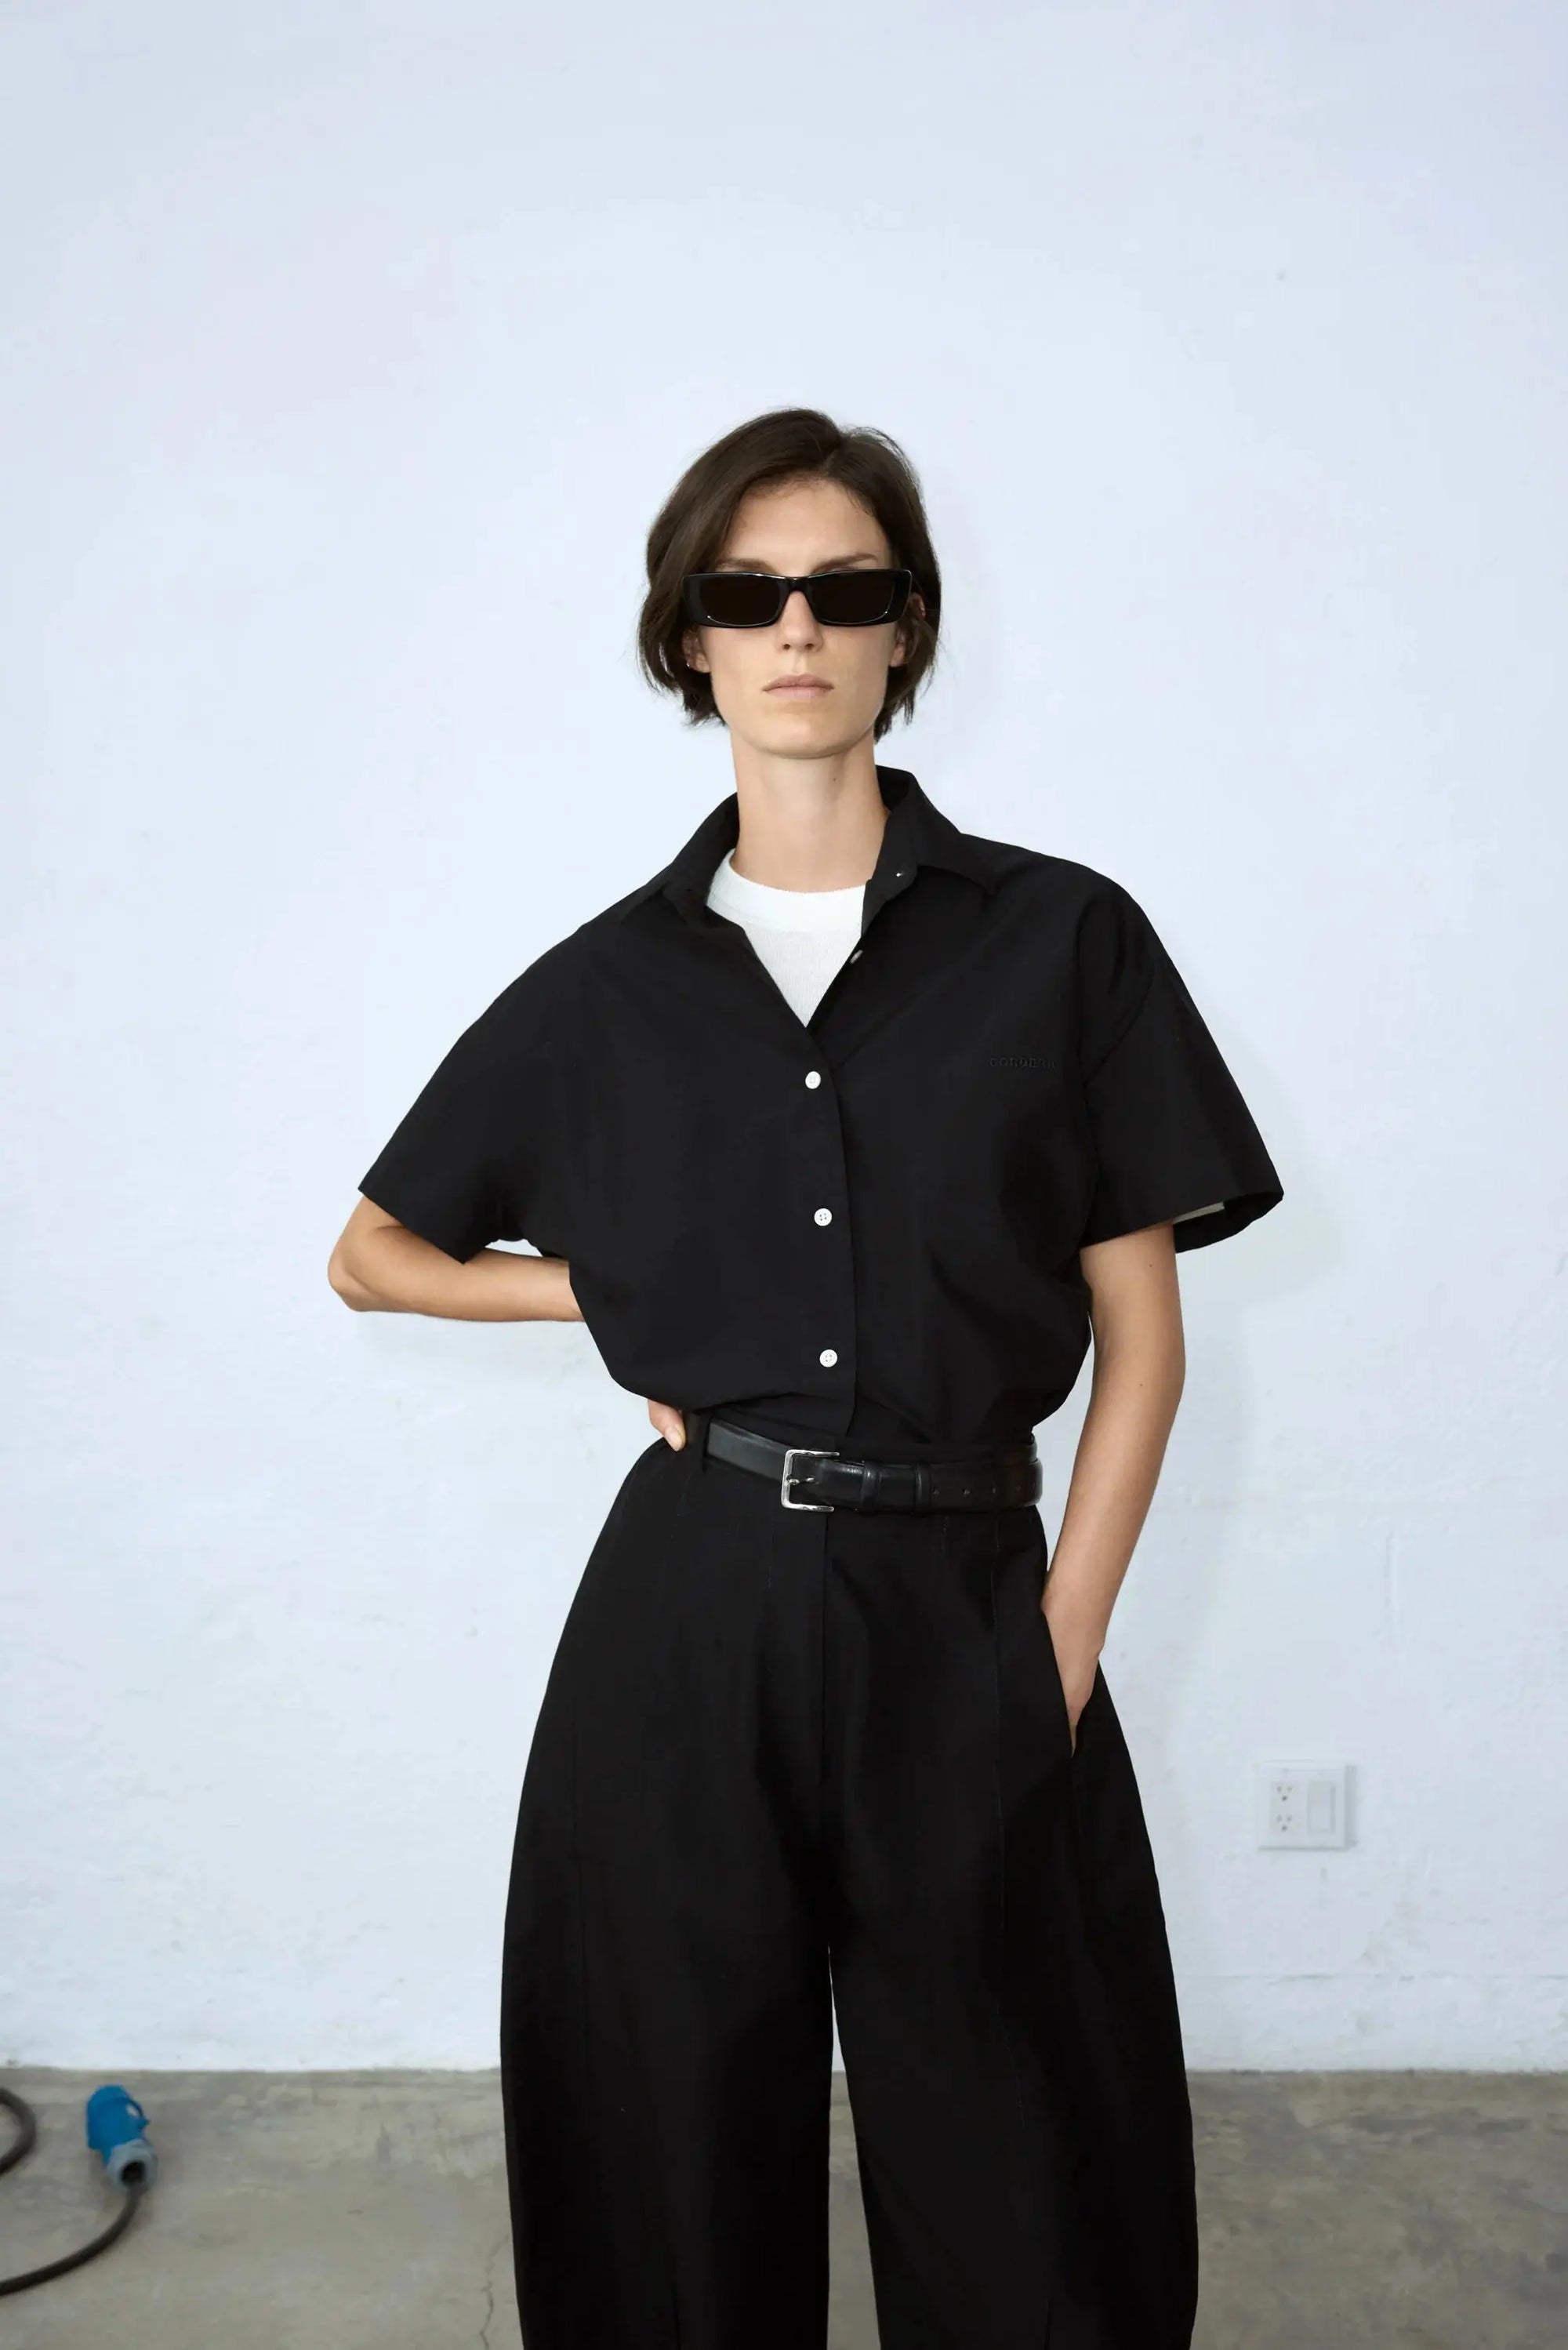 A black Cropped Shirt Black with a collar, buttoned up at the front with white buttons. It has a small front pocket and a tag inside the collar that reads "Cordera" in uppercase letters. The shirt is displayed against a plain white background and is available at bassalstore, Barcelona.